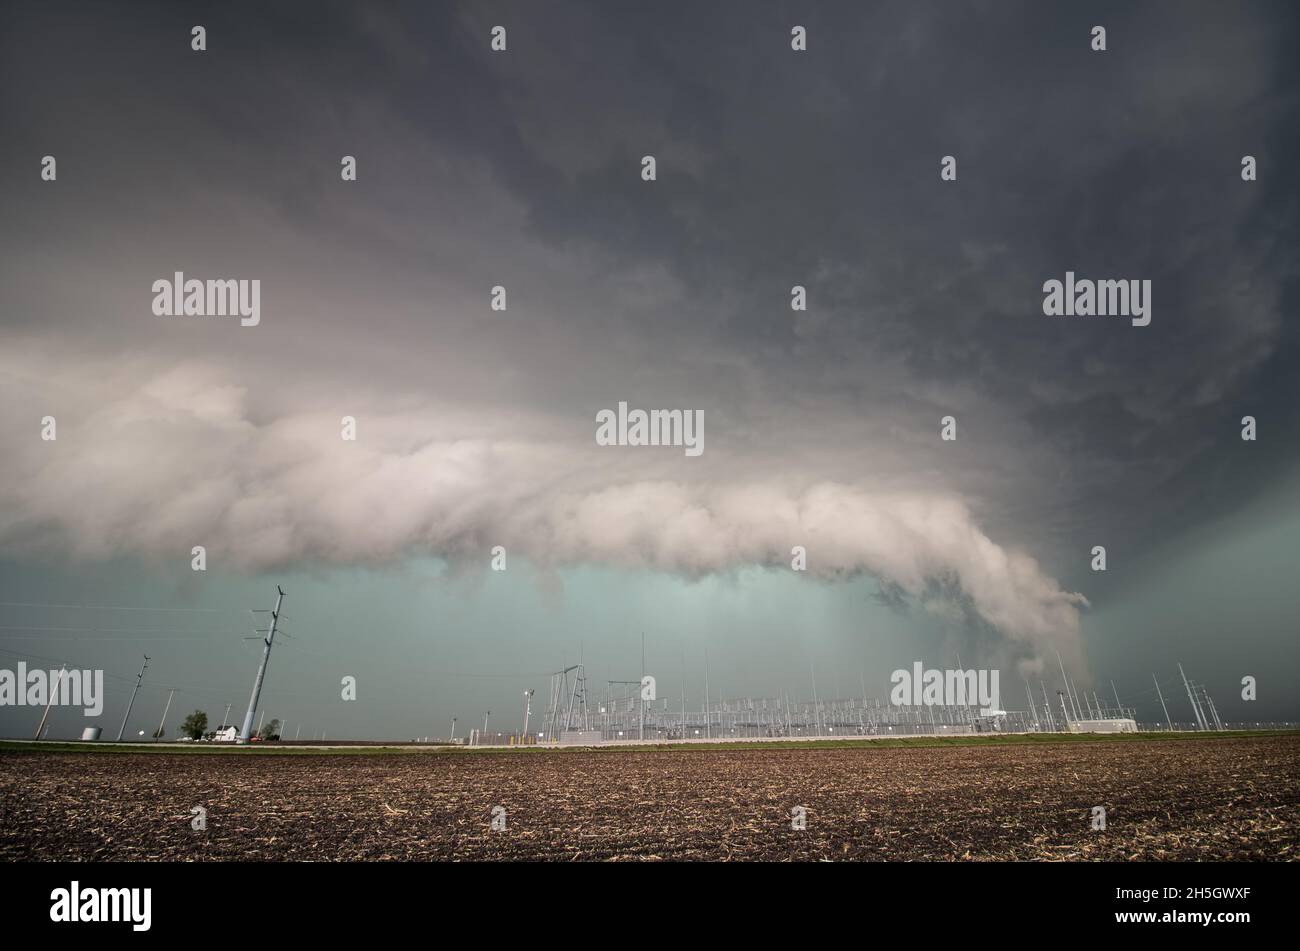 A severe thunderstorm and low shelf cloud loom over electrical equipment and power poles. Stock Photo